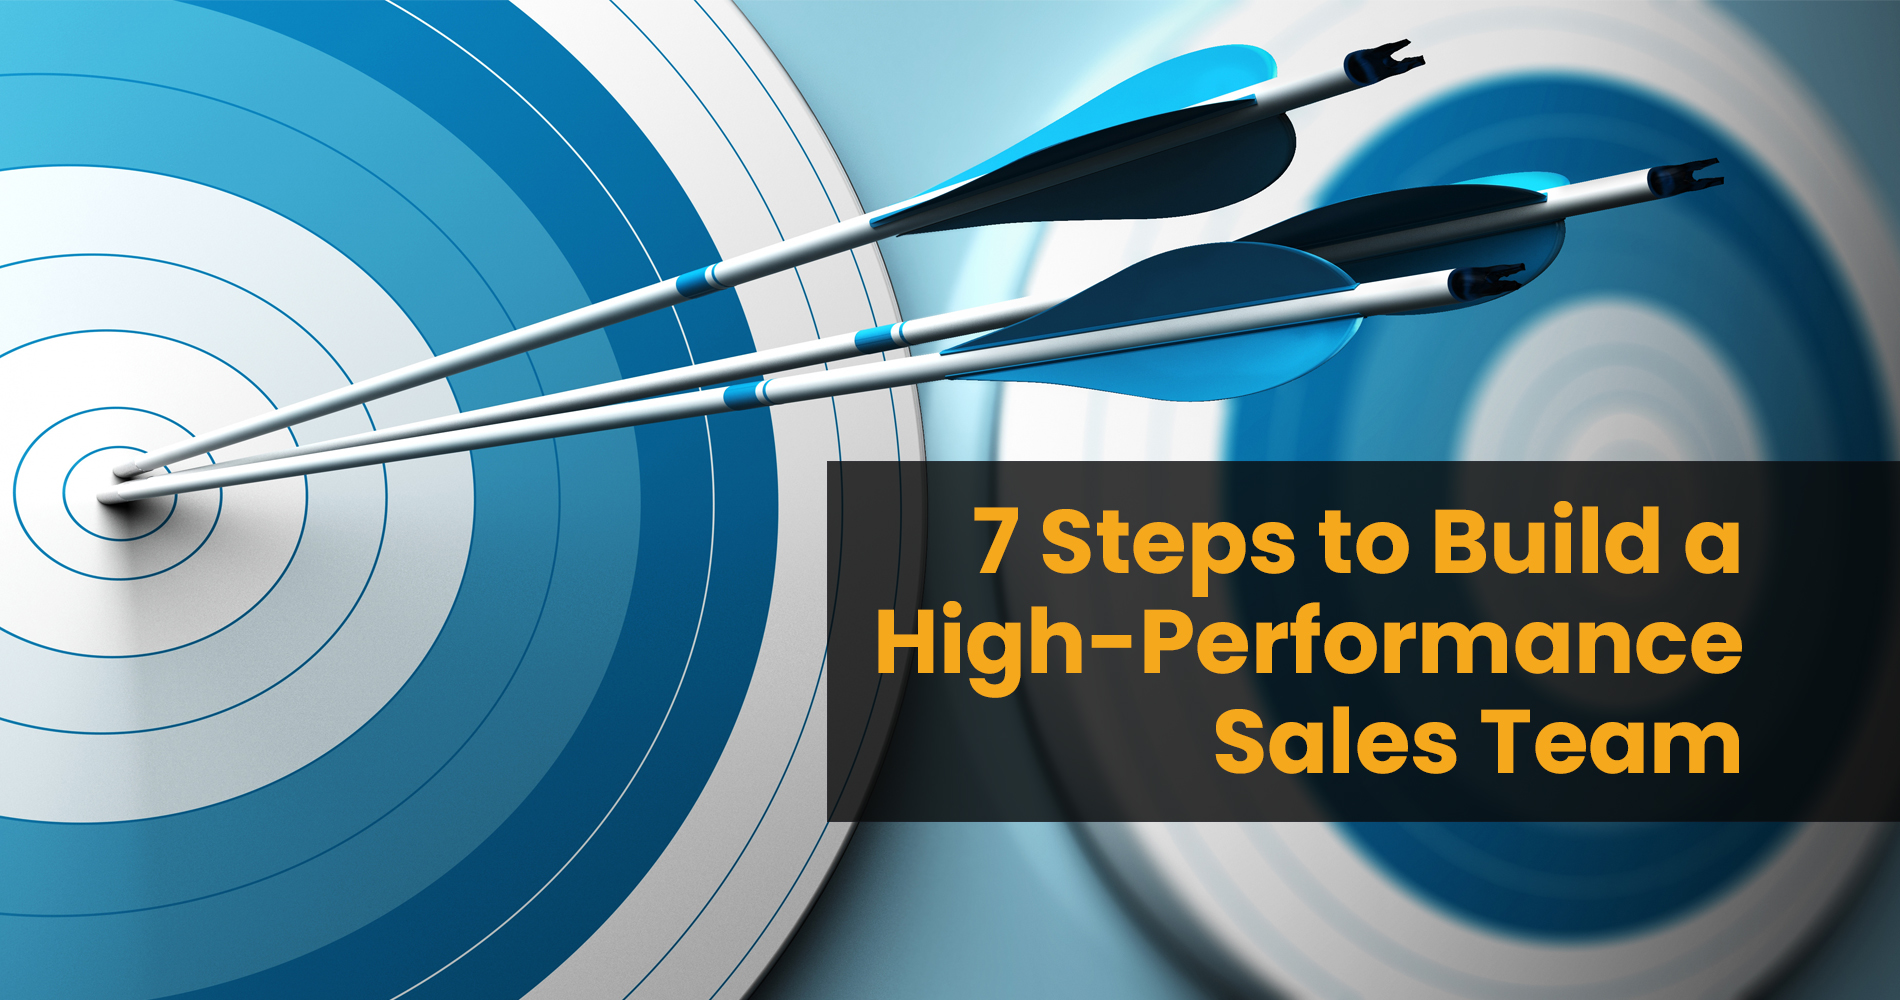 7 Steps to Build a High-Performance Sales Team